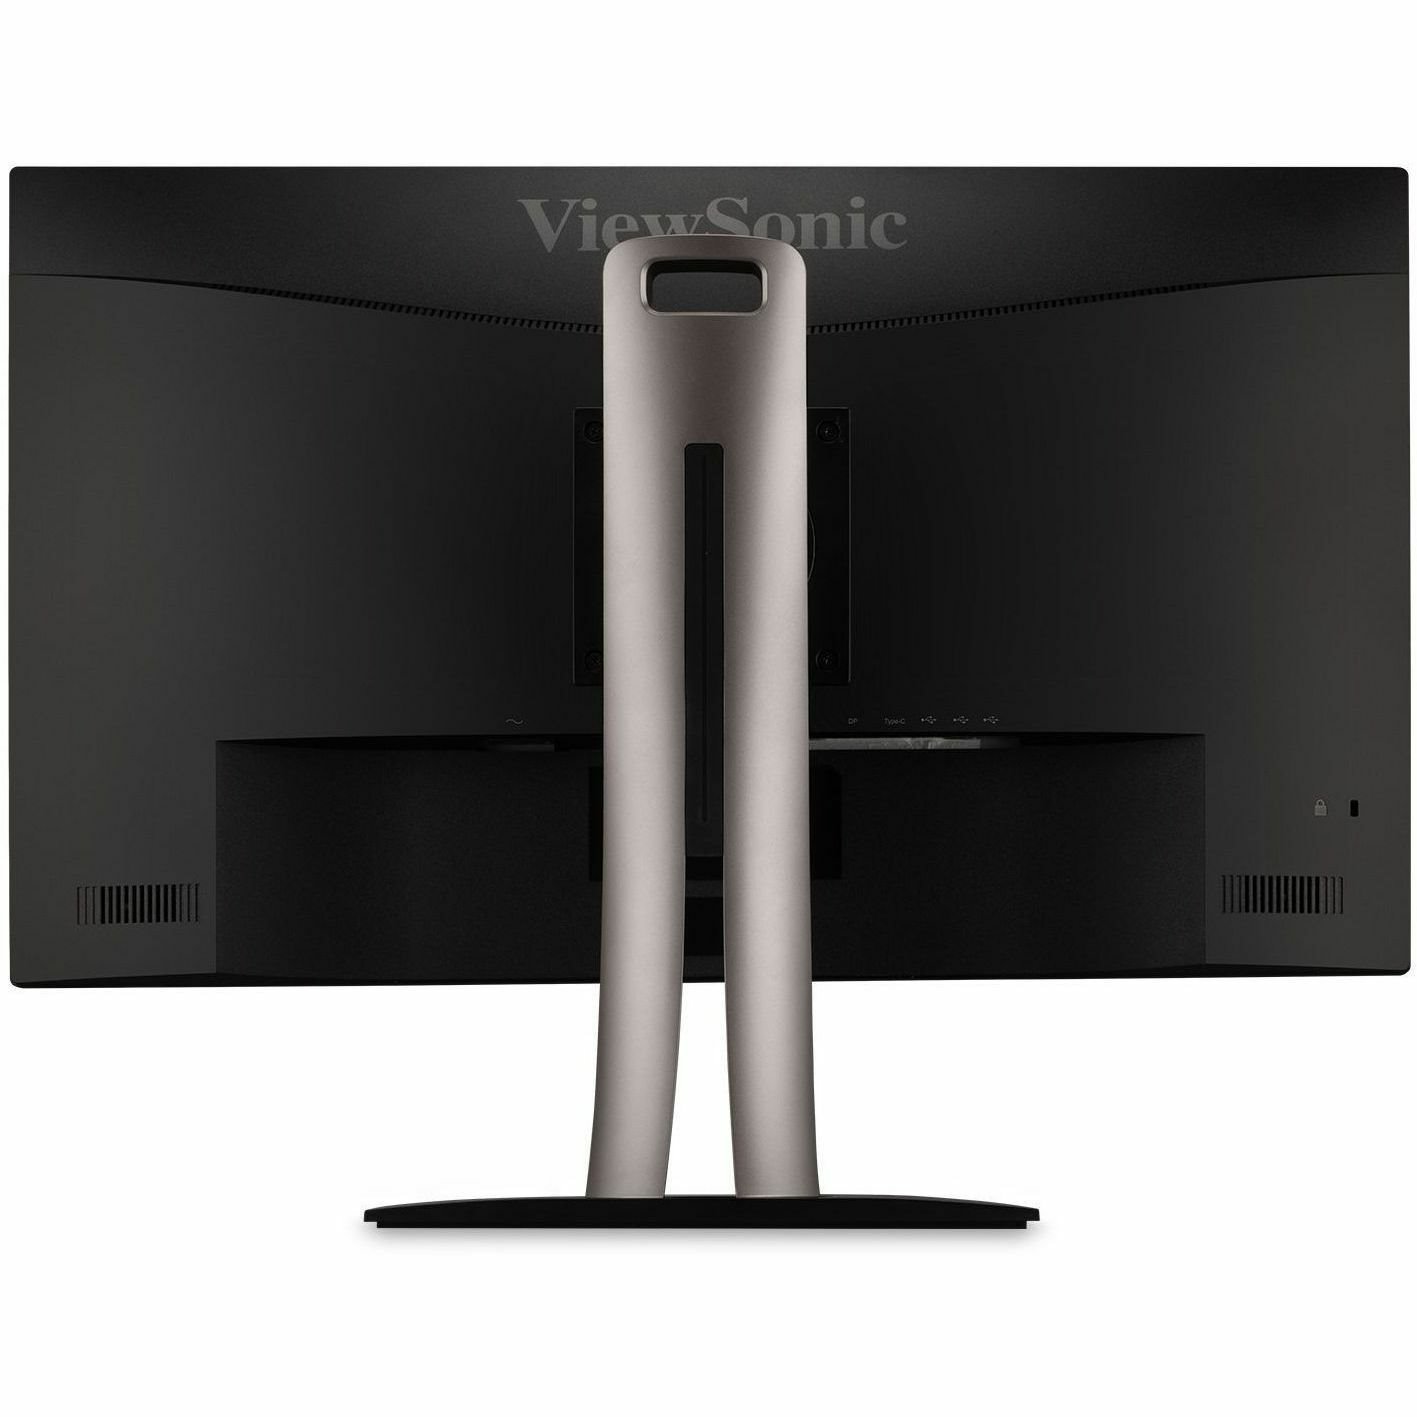 ViewSonic VP275-4K 27 Inch IPS 4K UHD Monitor Designed for Surface with advanced ergonomics, ColorPro 100% sRGB, 60W USB C, HDMI and DisplayPort inputs or Home and Office